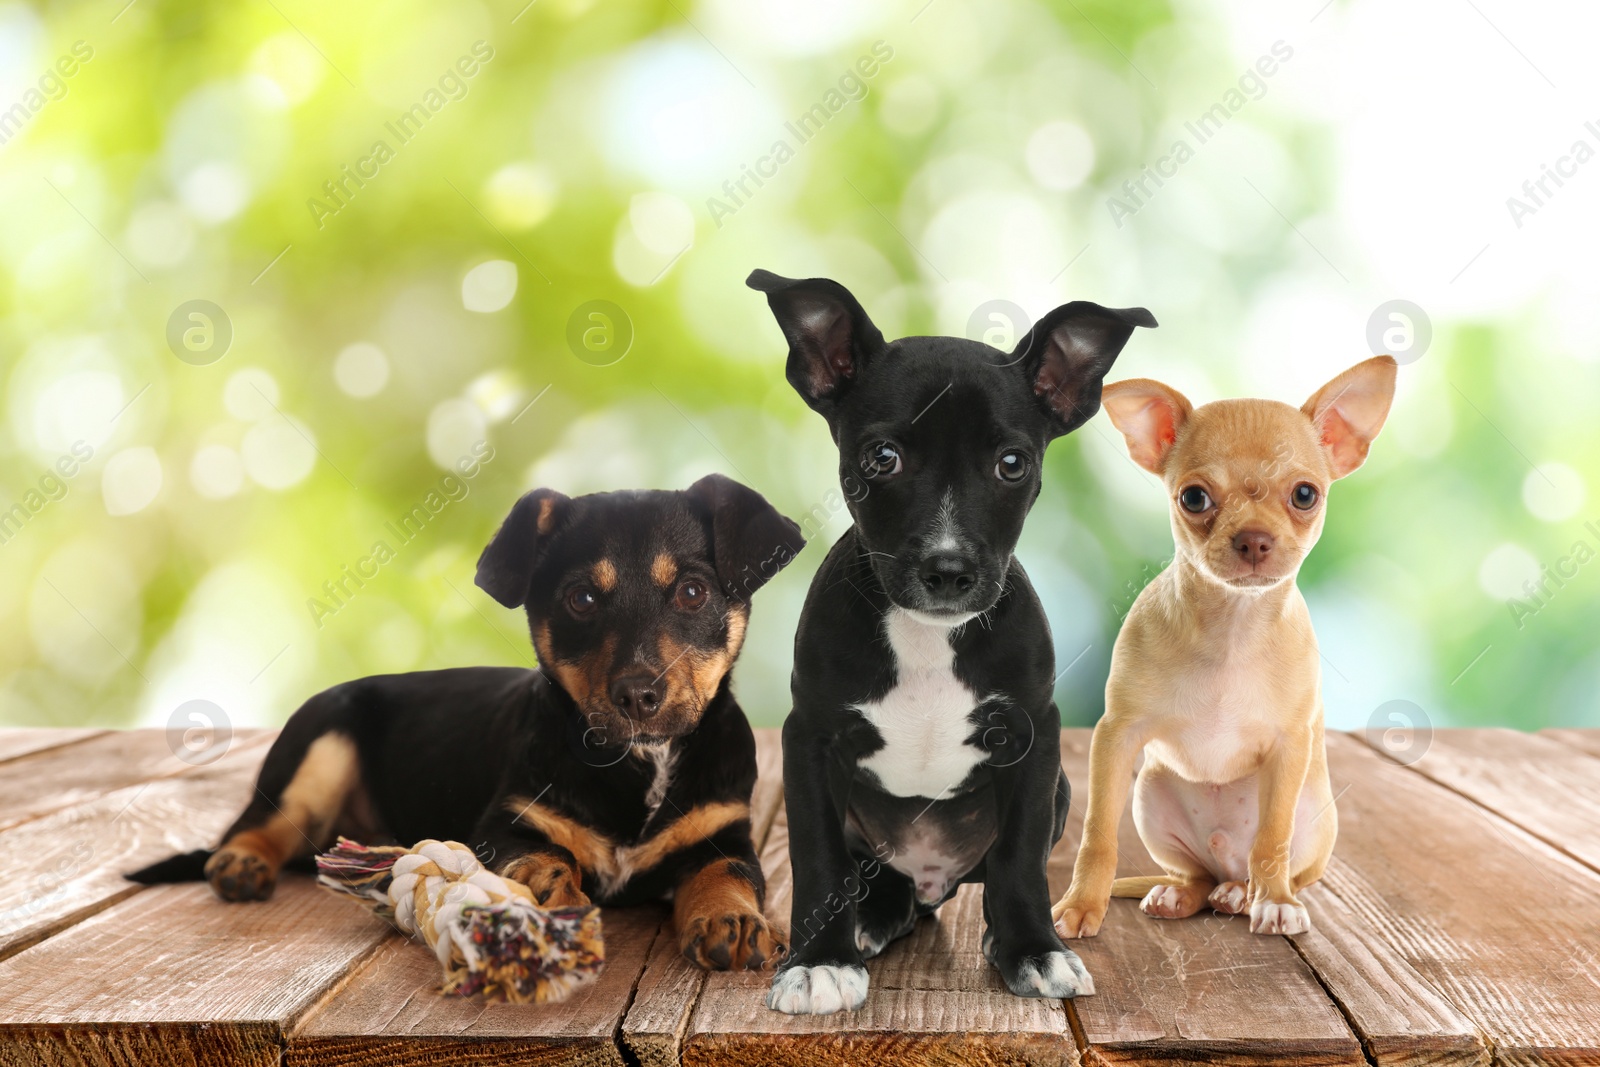 Image of Cute puppies on wooden surface outdoors, bokeh effect. Adorable pets